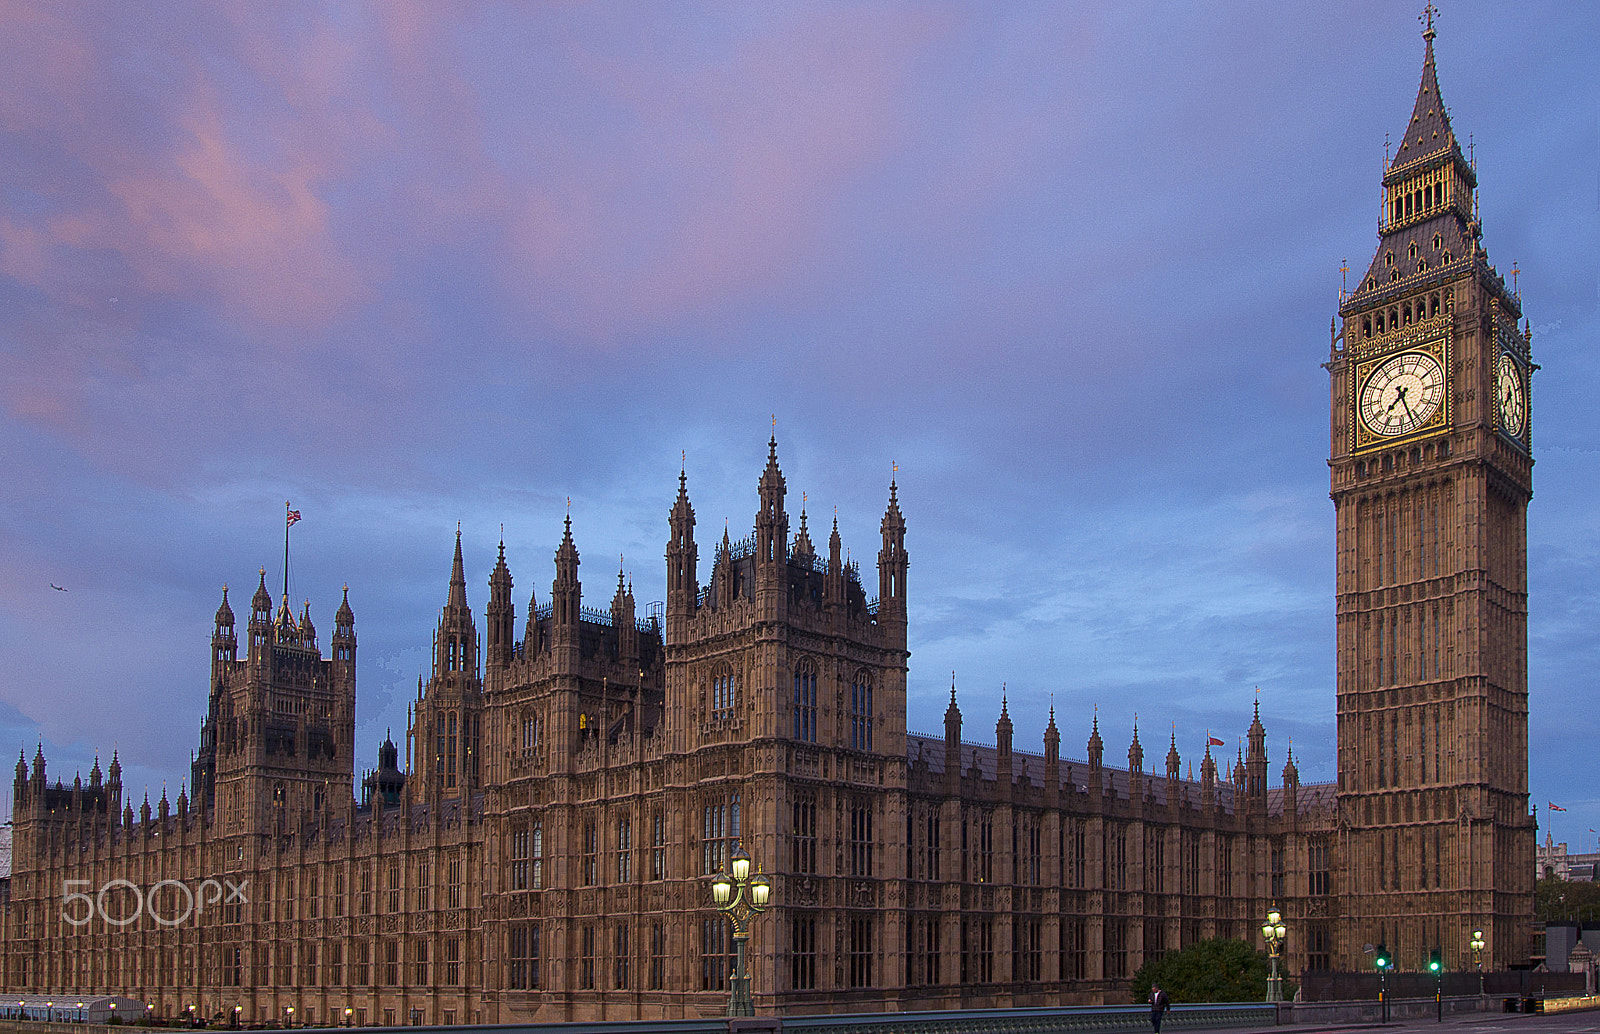 Sony Alpha DSLR-A550 + Tamron SP AF 17-50mm F2.8 XR Di II LD Aspherical (IF) sample photo. Parliament building from westminster bridge photography